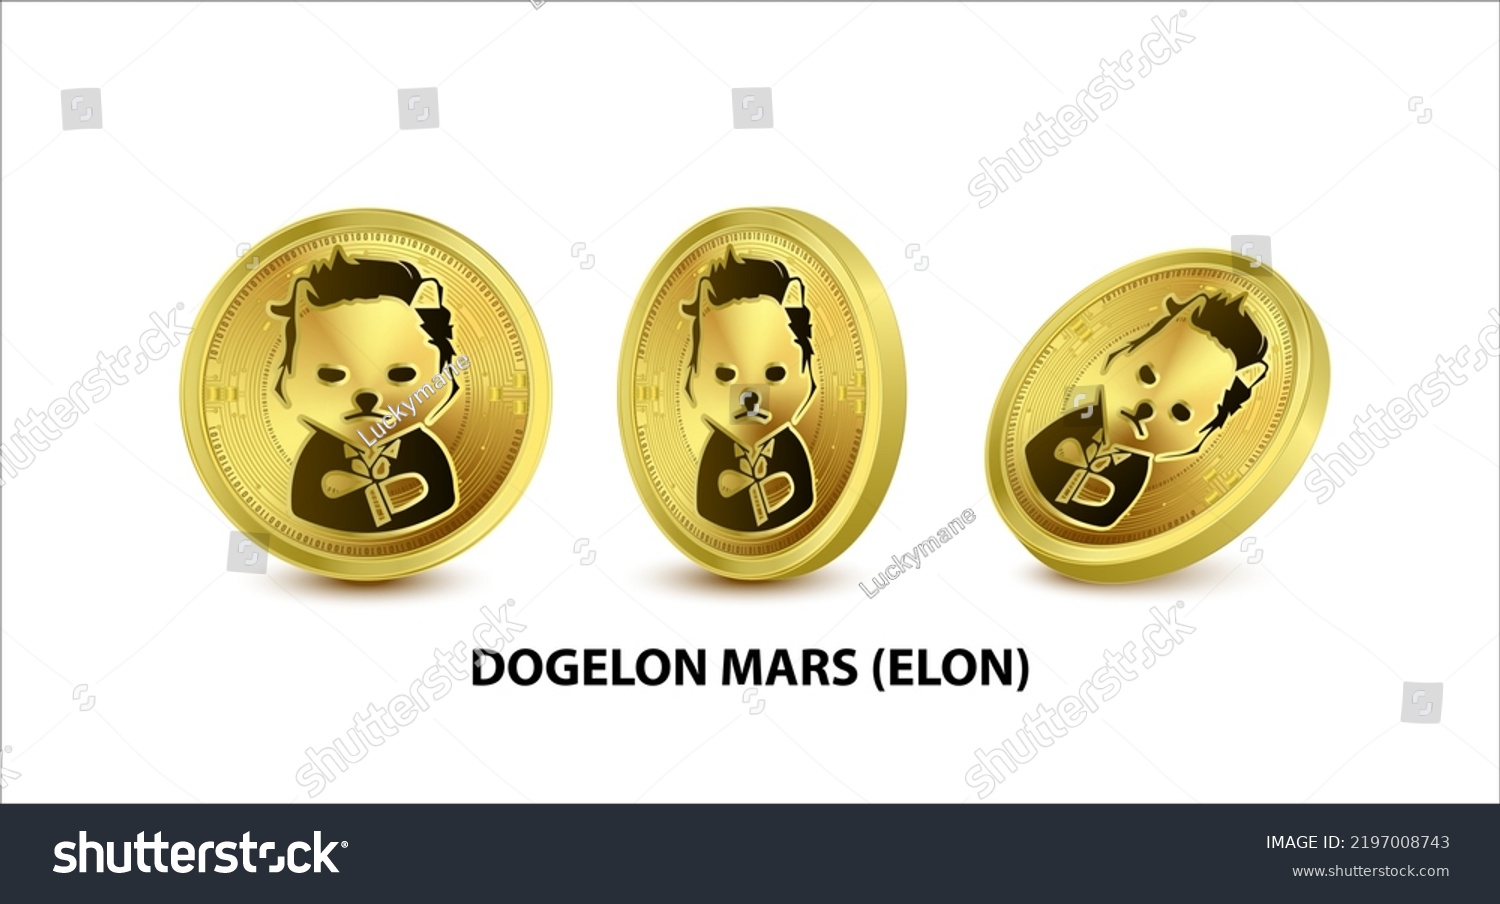 SVG of Set of Gold coin Dogelon Mars (ELON) isometric Physical coins. Digital currency. Vector illustration 3D.  Cryptocurrency Golden coins with bitcoin, ripple ethereum symbol isolated on white background. svg